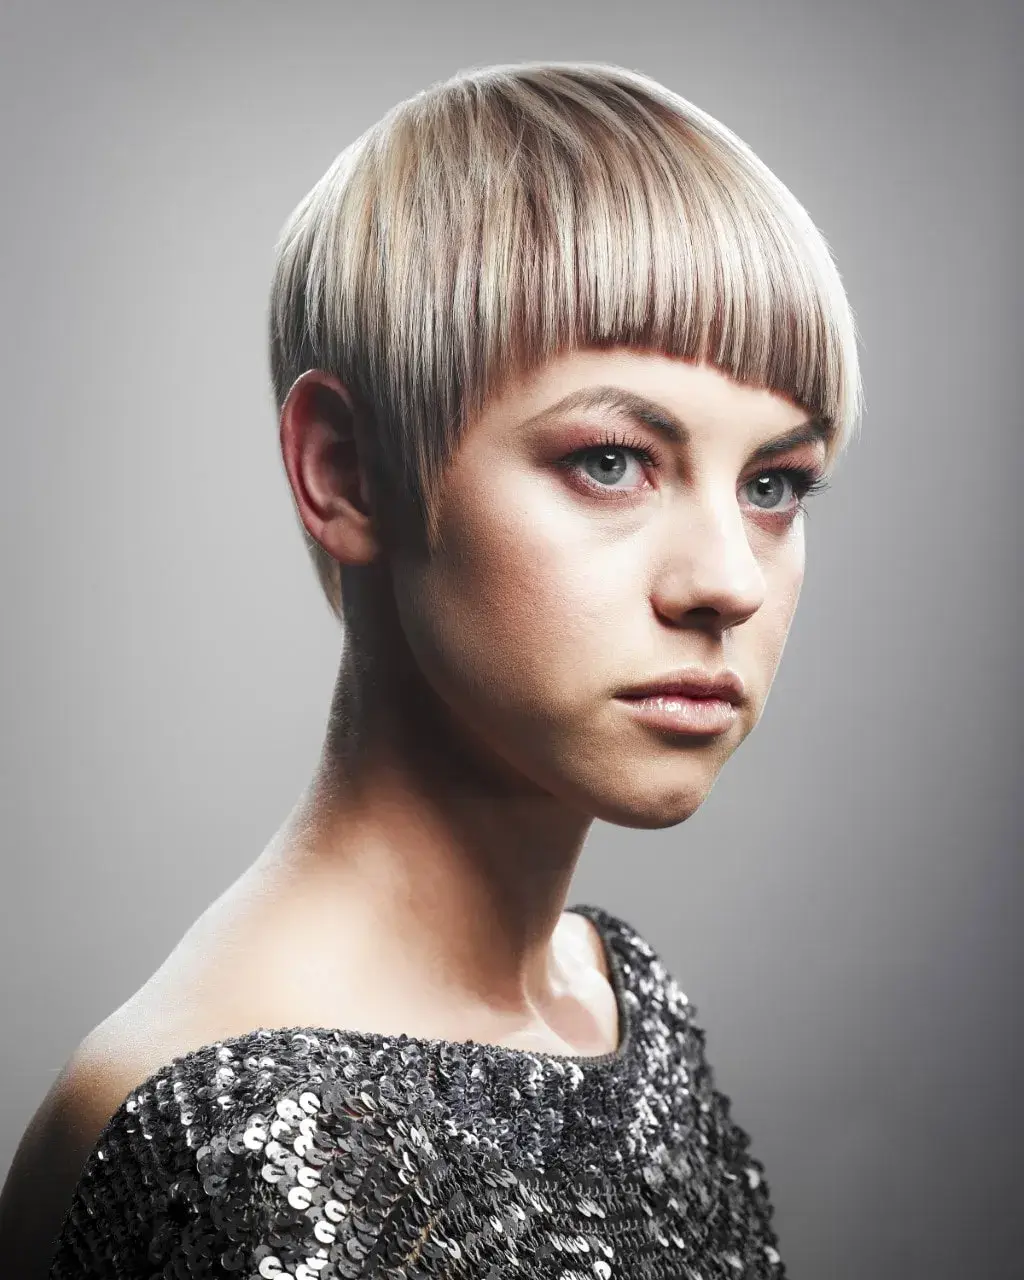 Woman with blonde highlights and pixie cut in silver sequin top